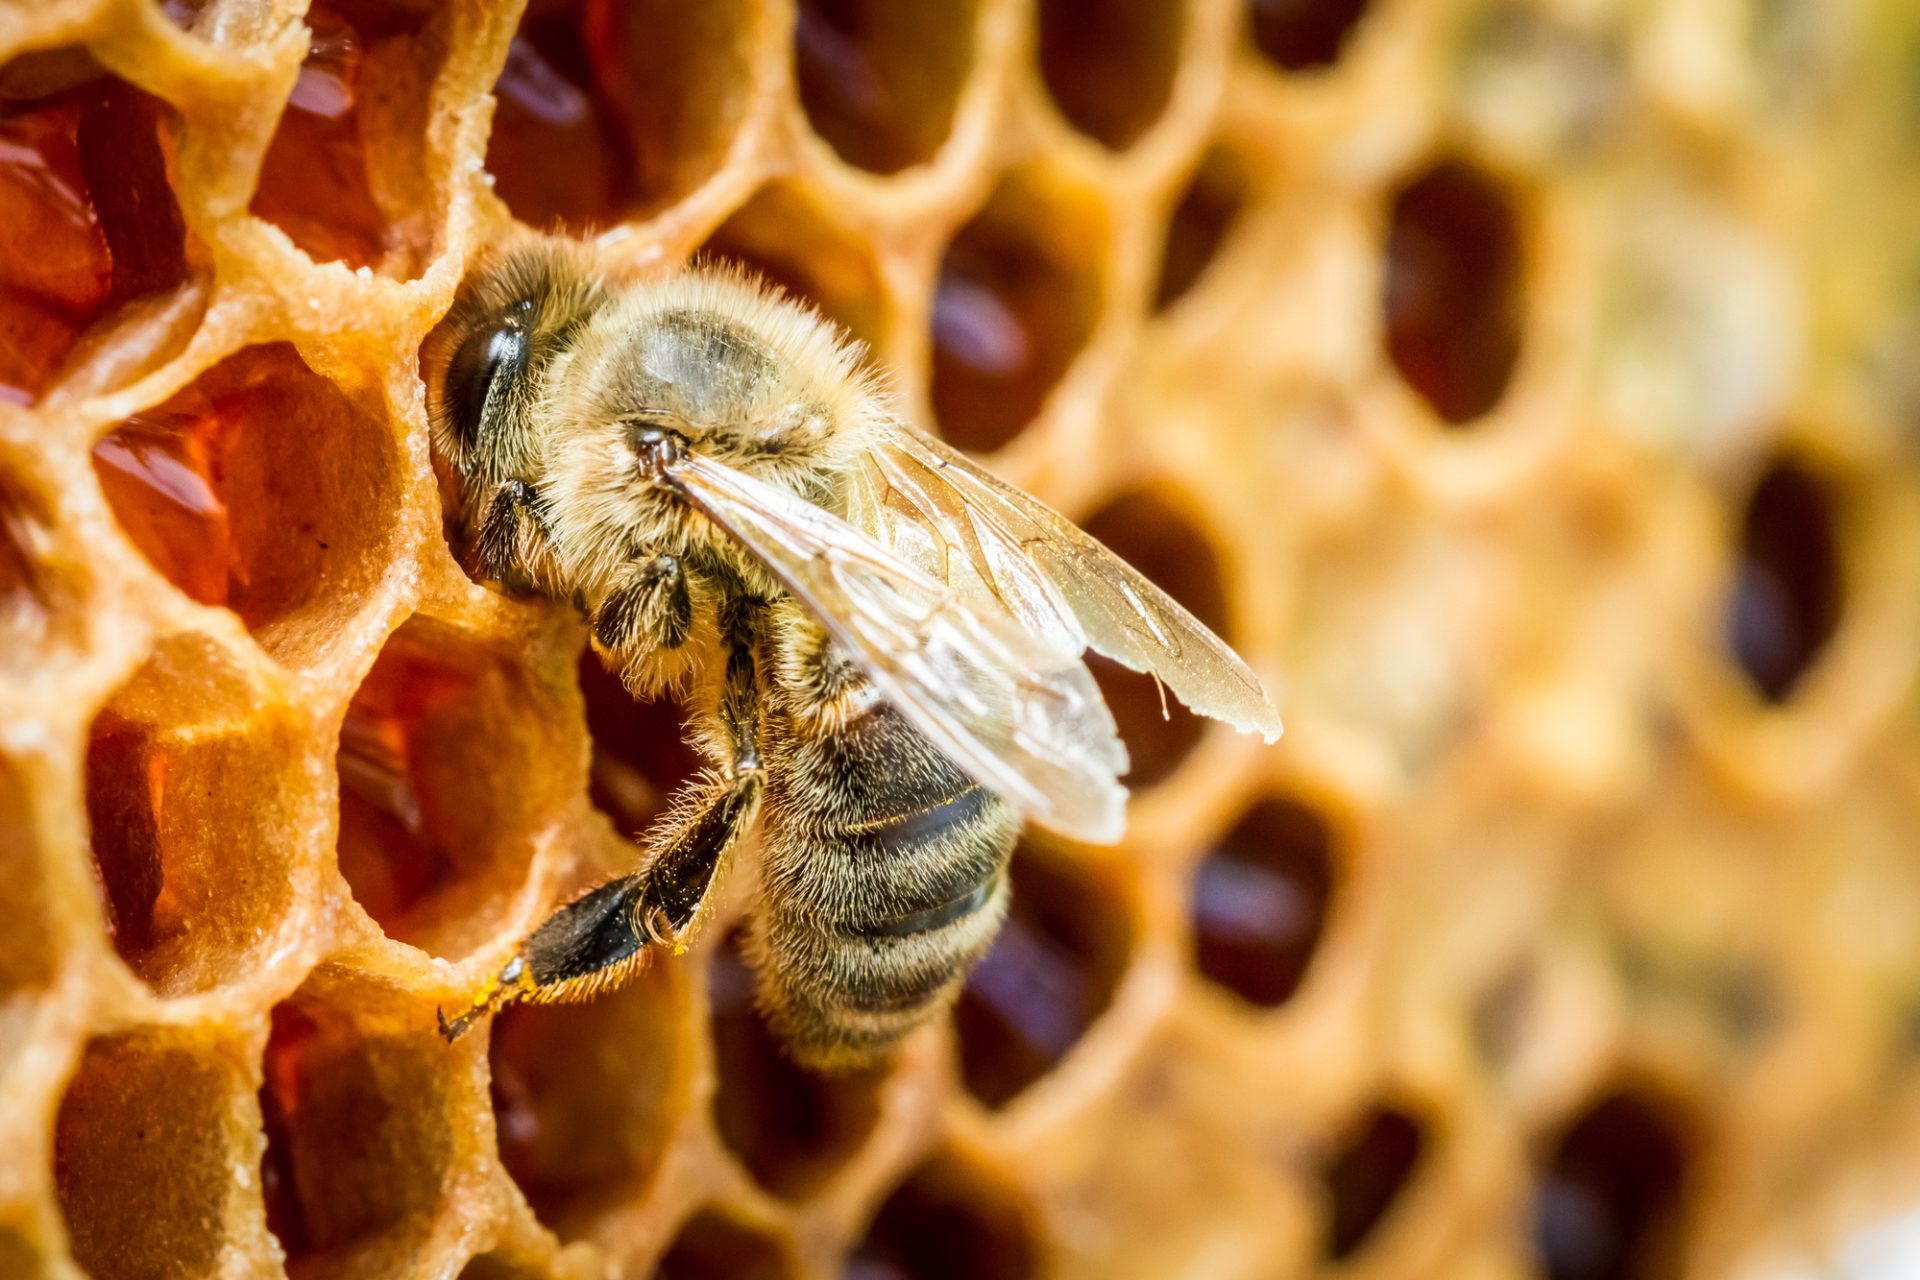 Beekeeping Facts - Close up of bees in a beehive on honeycomb